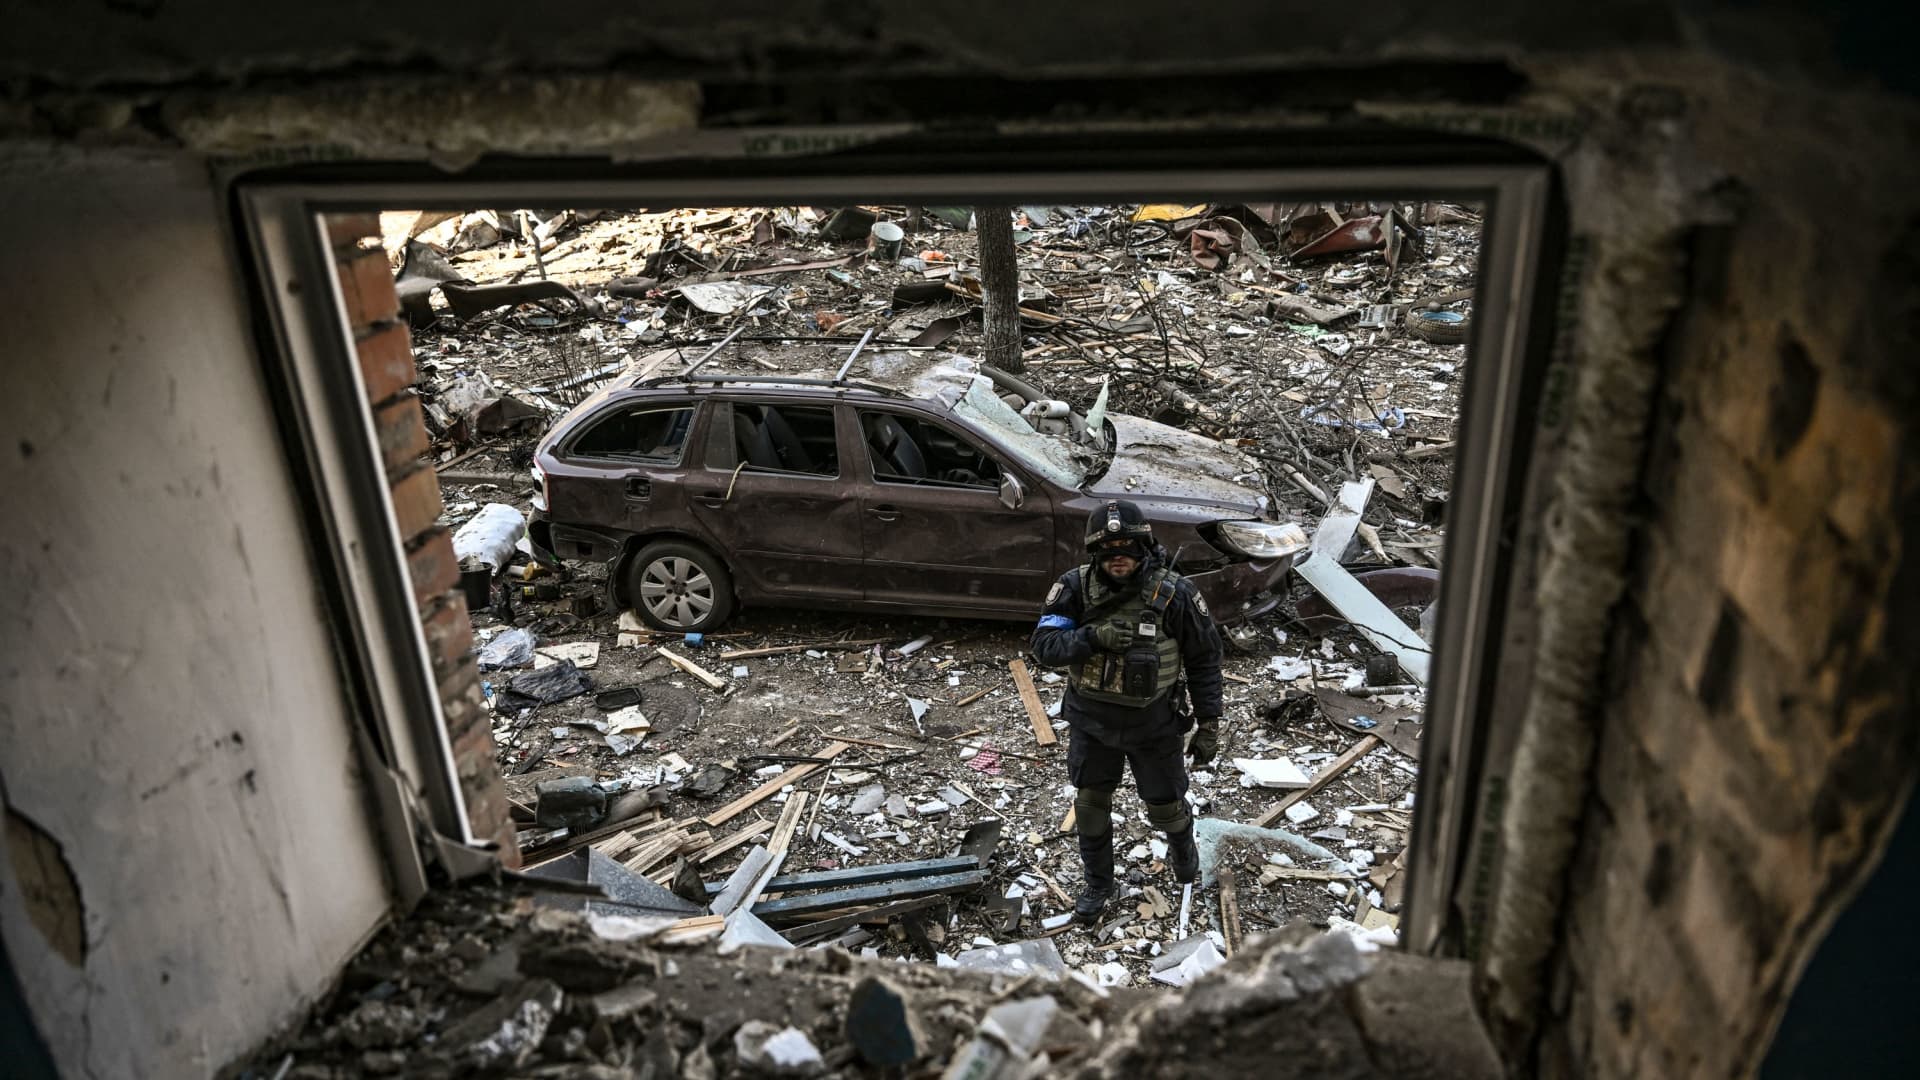 An Ukranian serviceman stands among damages in a residential area after shelling in Kyiv on March 18, 2022, as Russian troops try to encircle the Ukrainian capital as part of their slow-moving offensive.